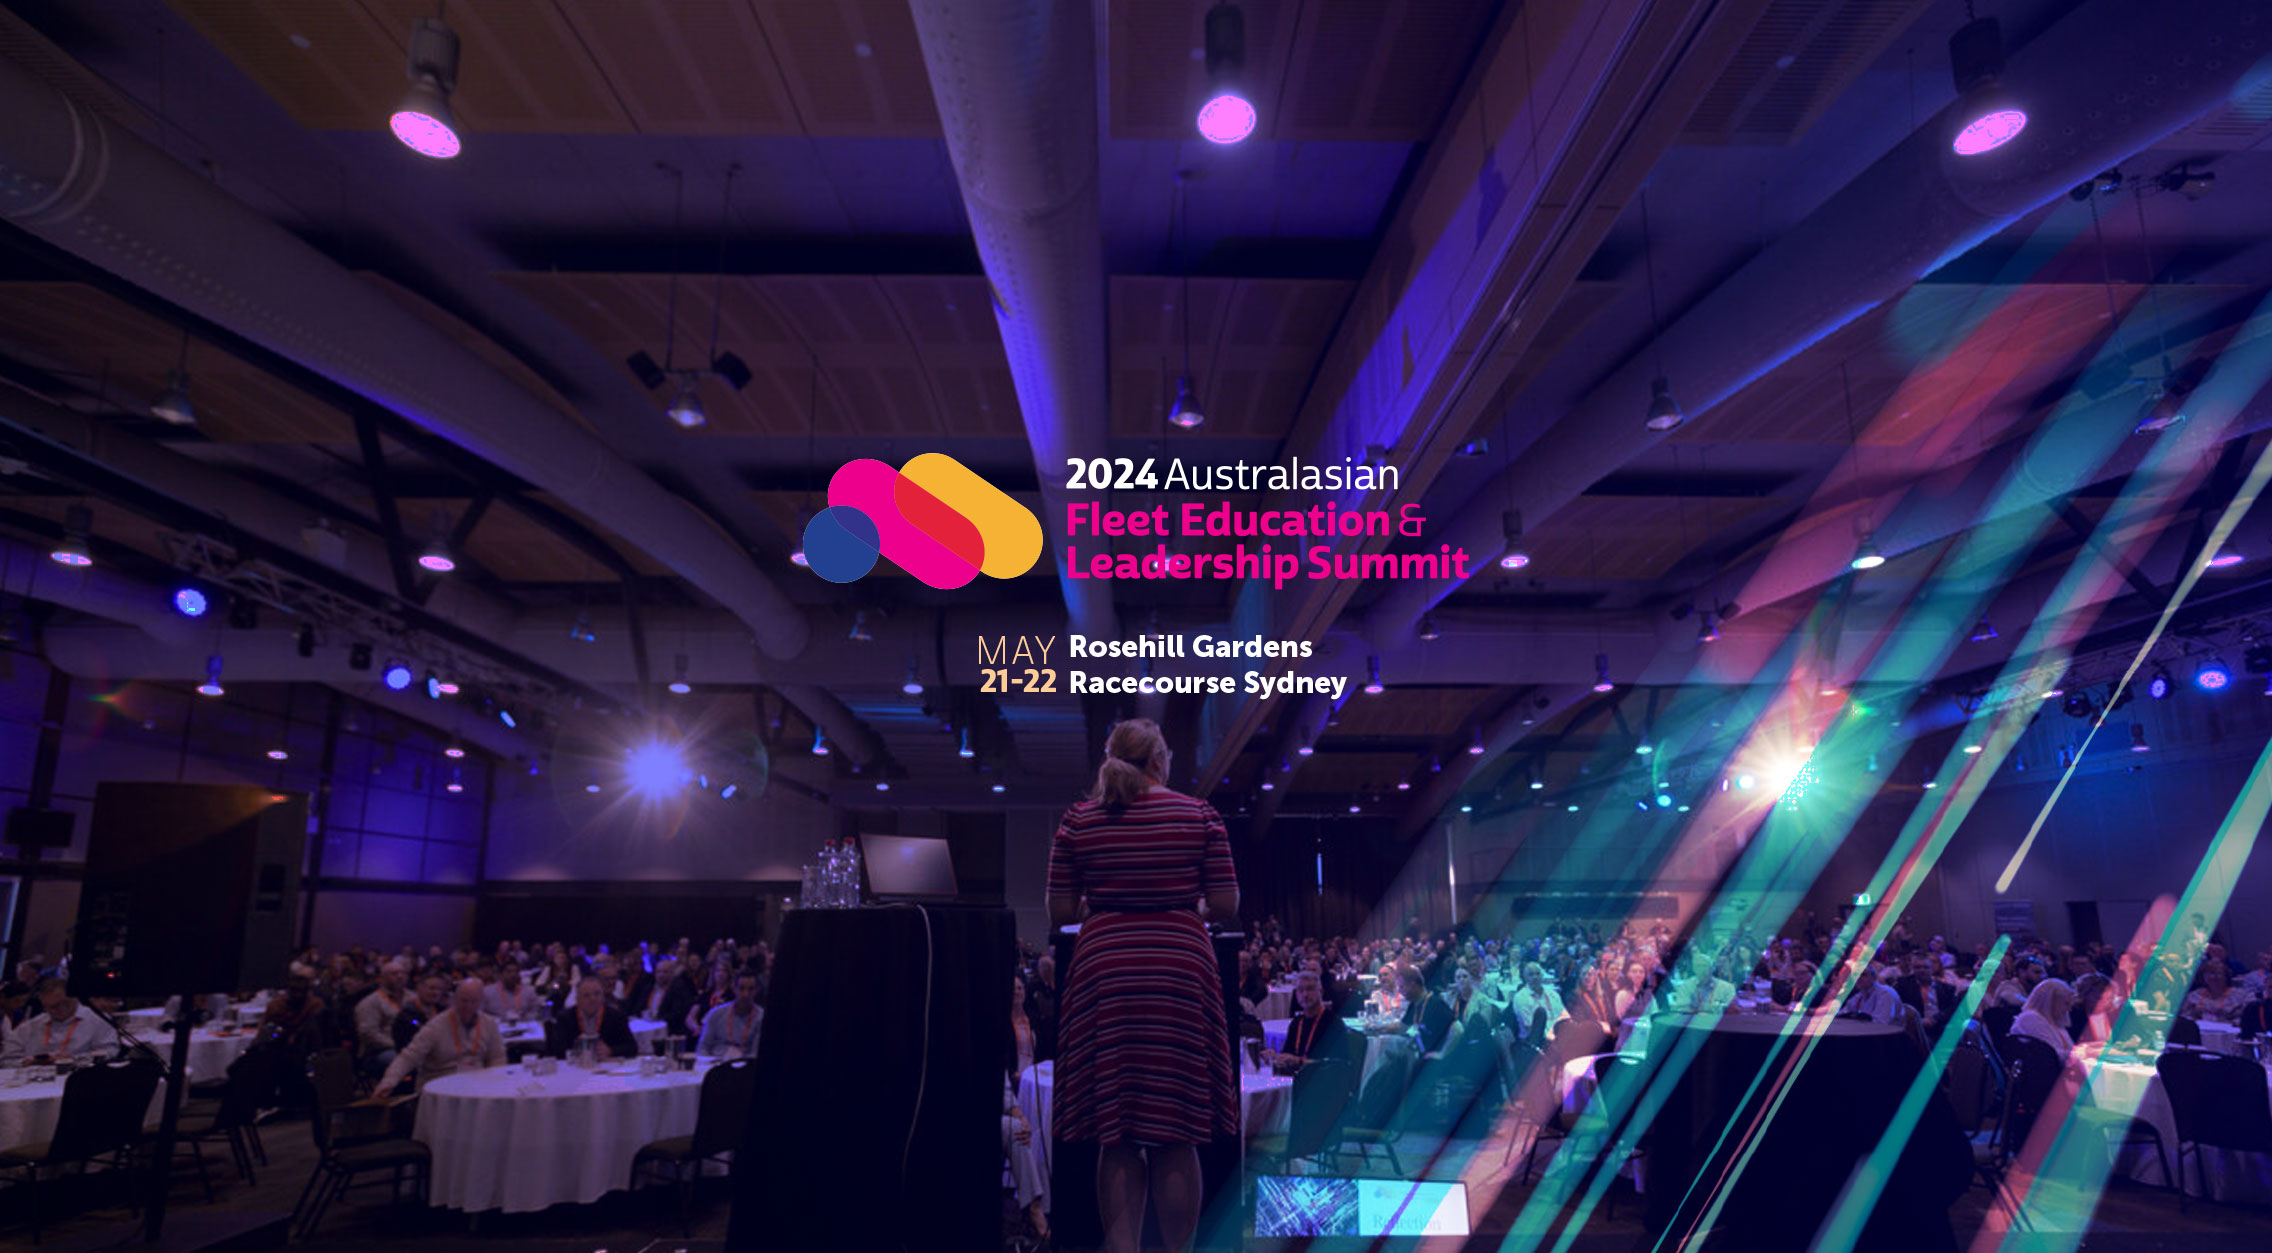 Counting Down to the 2024 Australasian Fleet Education and Leadership Summit